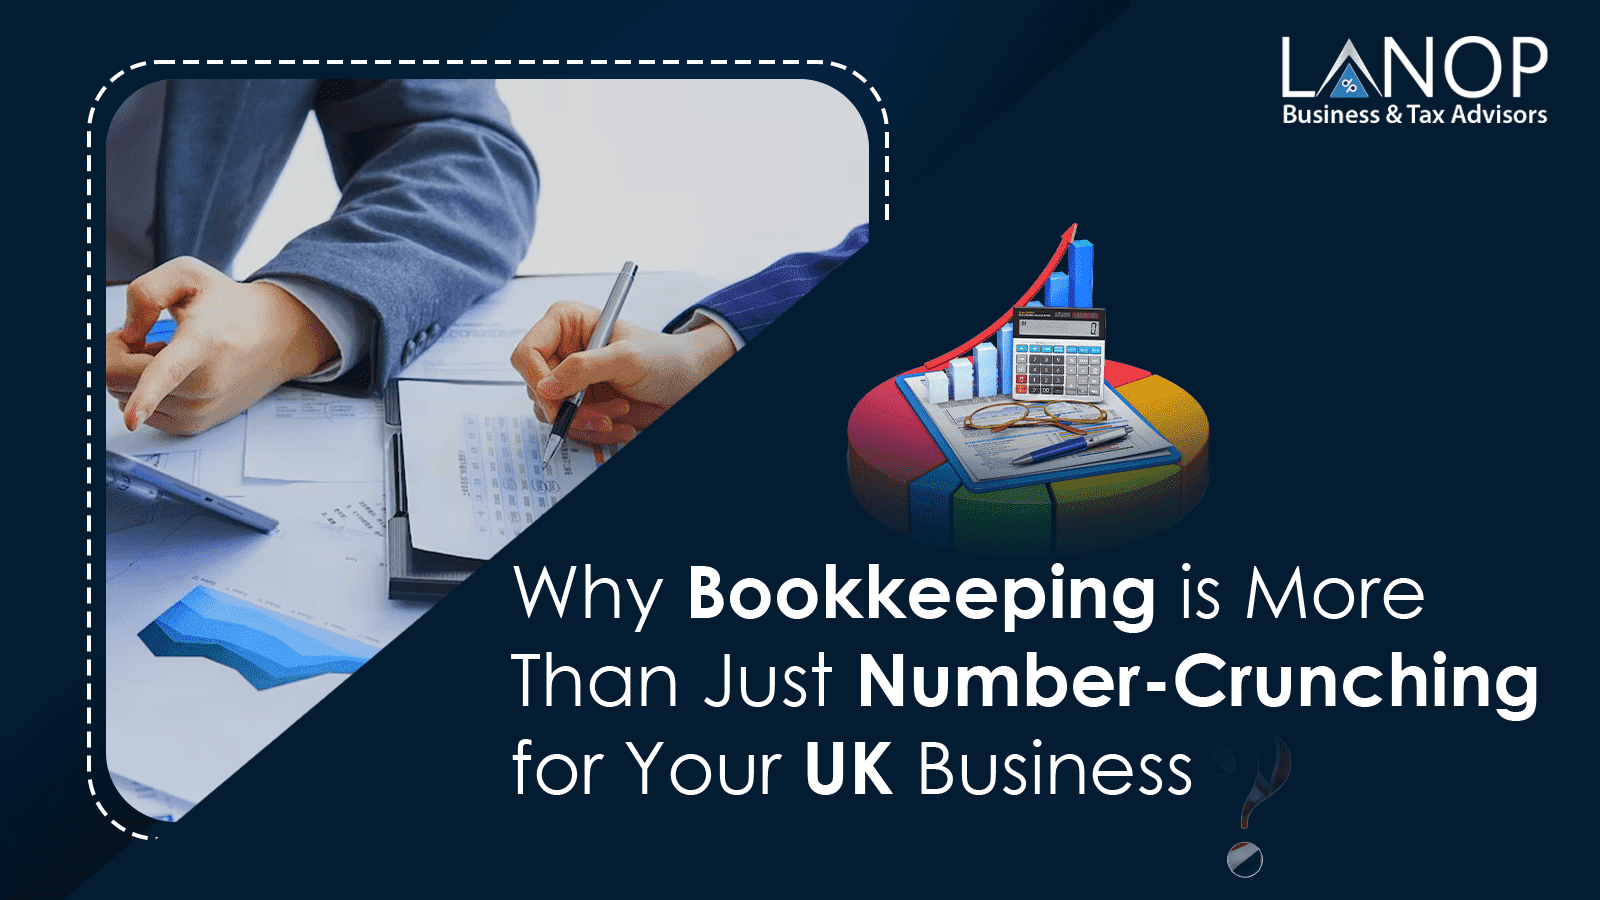 Why Bookkeeping is More Than Just Number-Crunching for Your UK Business